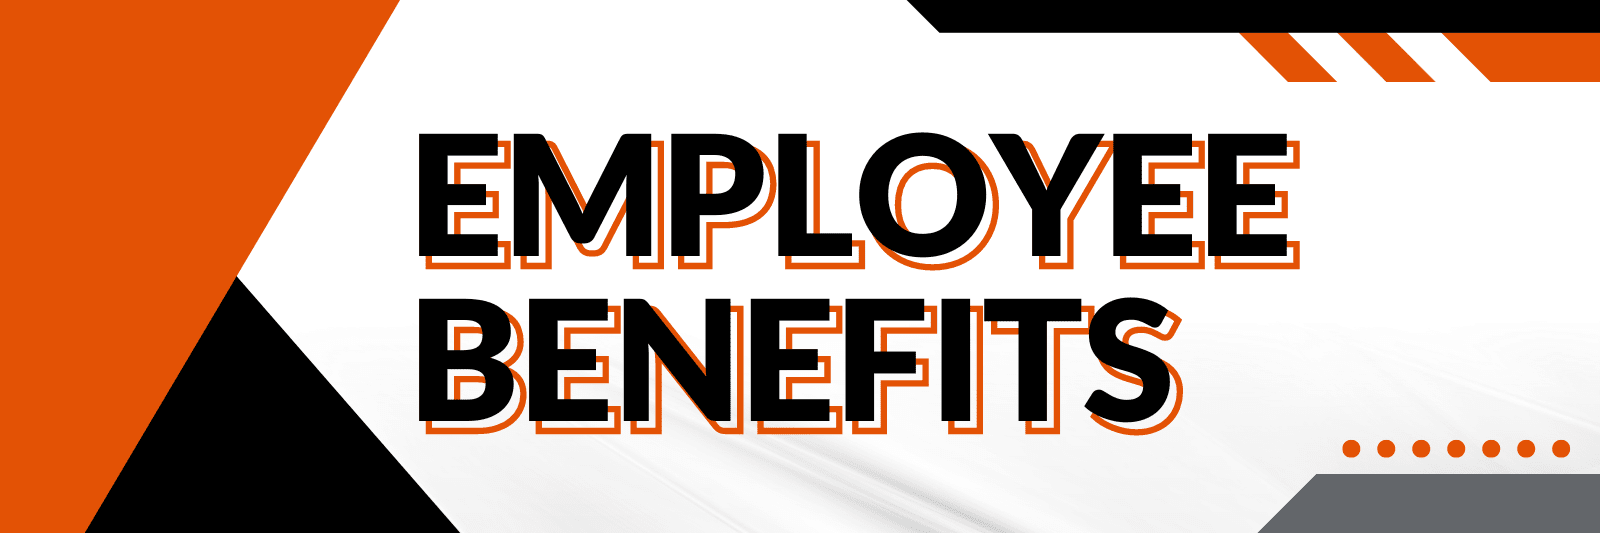 employee benefit header with geometric shapes in background